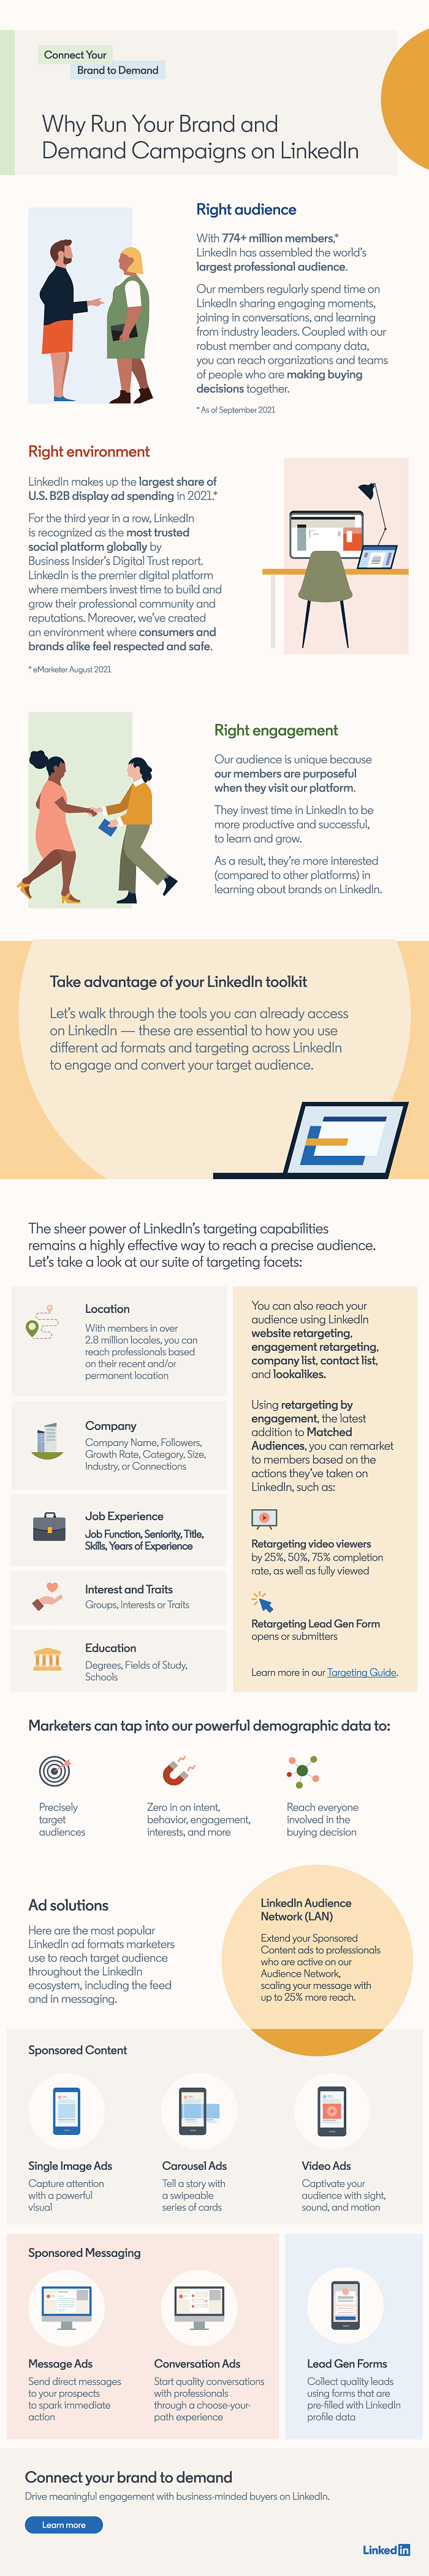 linkedin outlines the strength of its reach and ad targeting options infographic